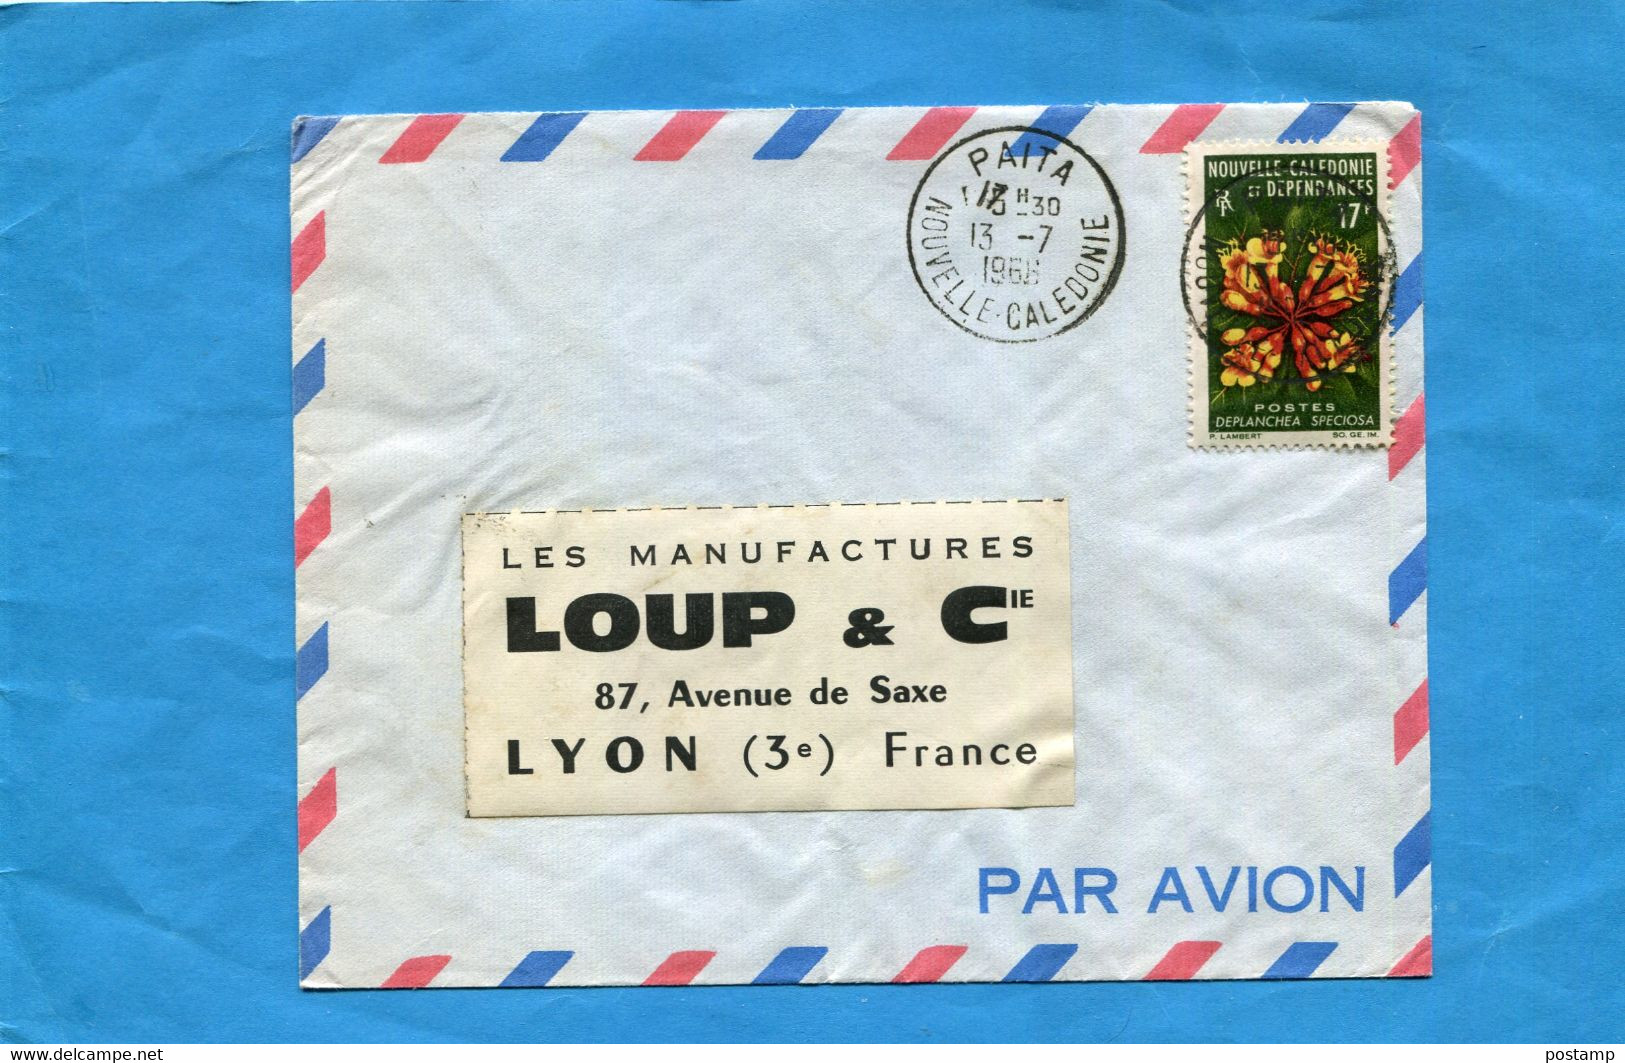 MARCOPHILIE-Nlle Calédonie-lettre+thematics Stamps-cad PAITA- Stamps N°321 Flower-deplanhéa - Covers & Documents